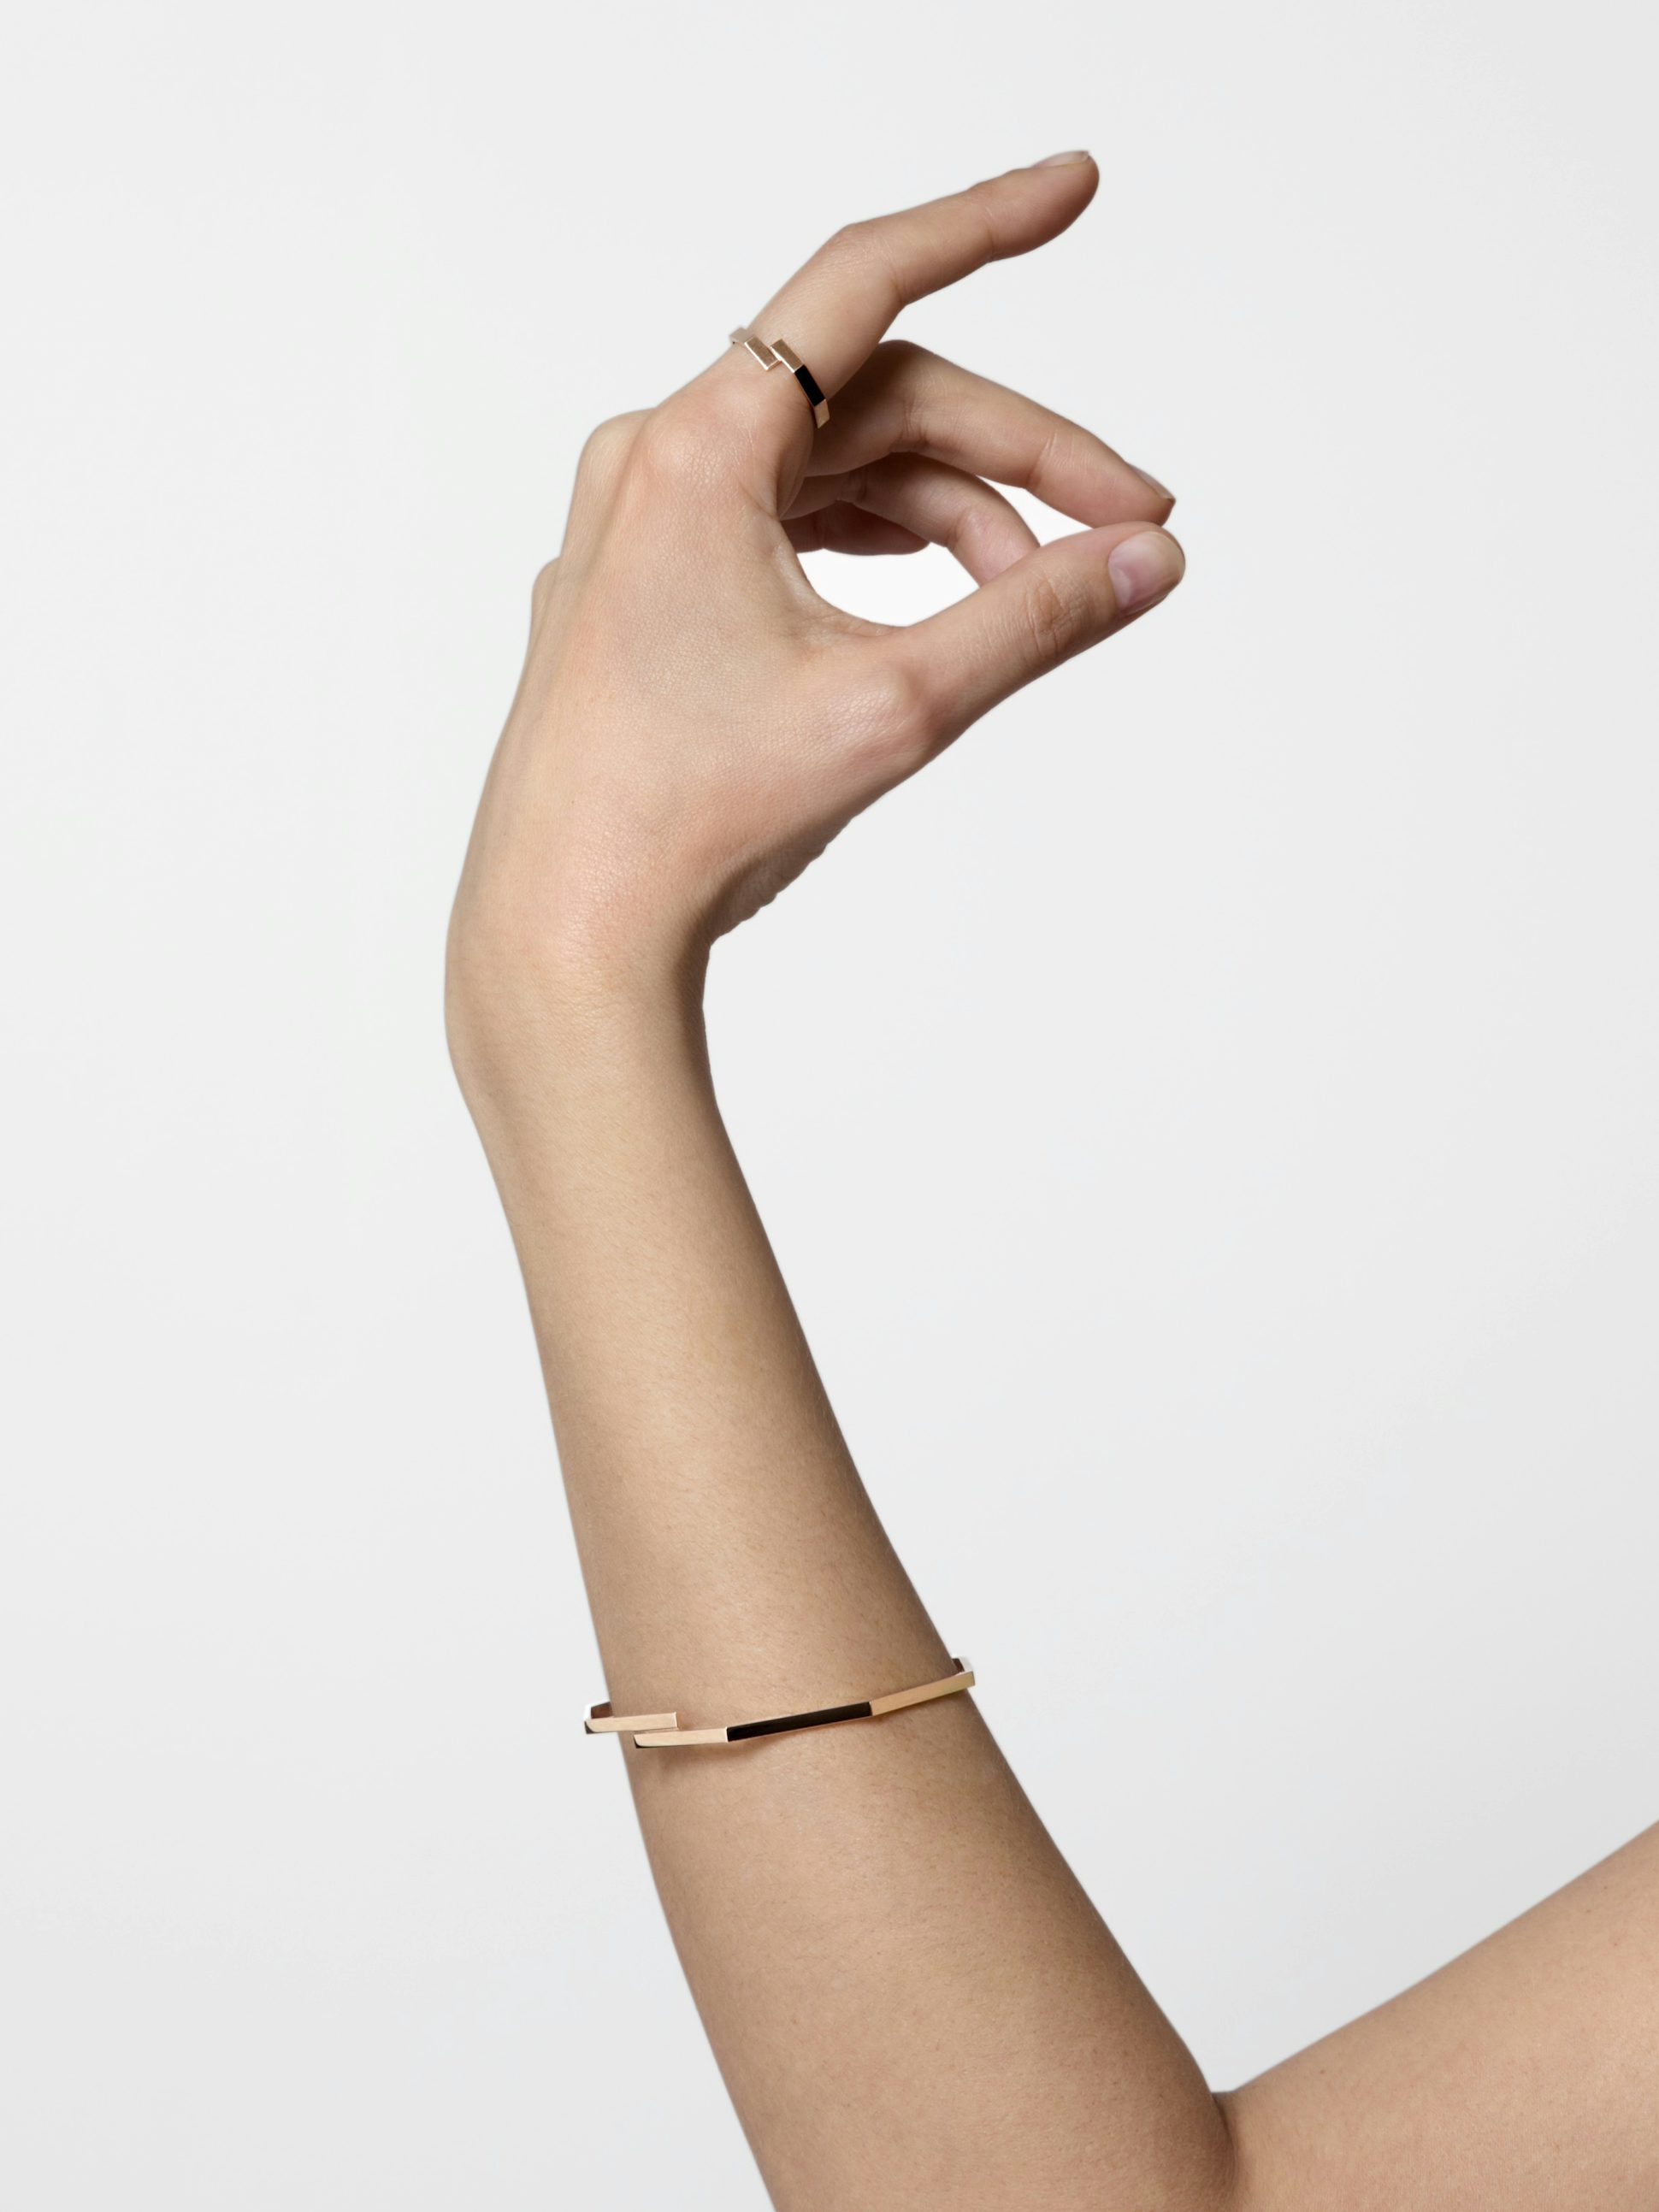 Octogone double bangle in 18k Fairmined ethical rose gold